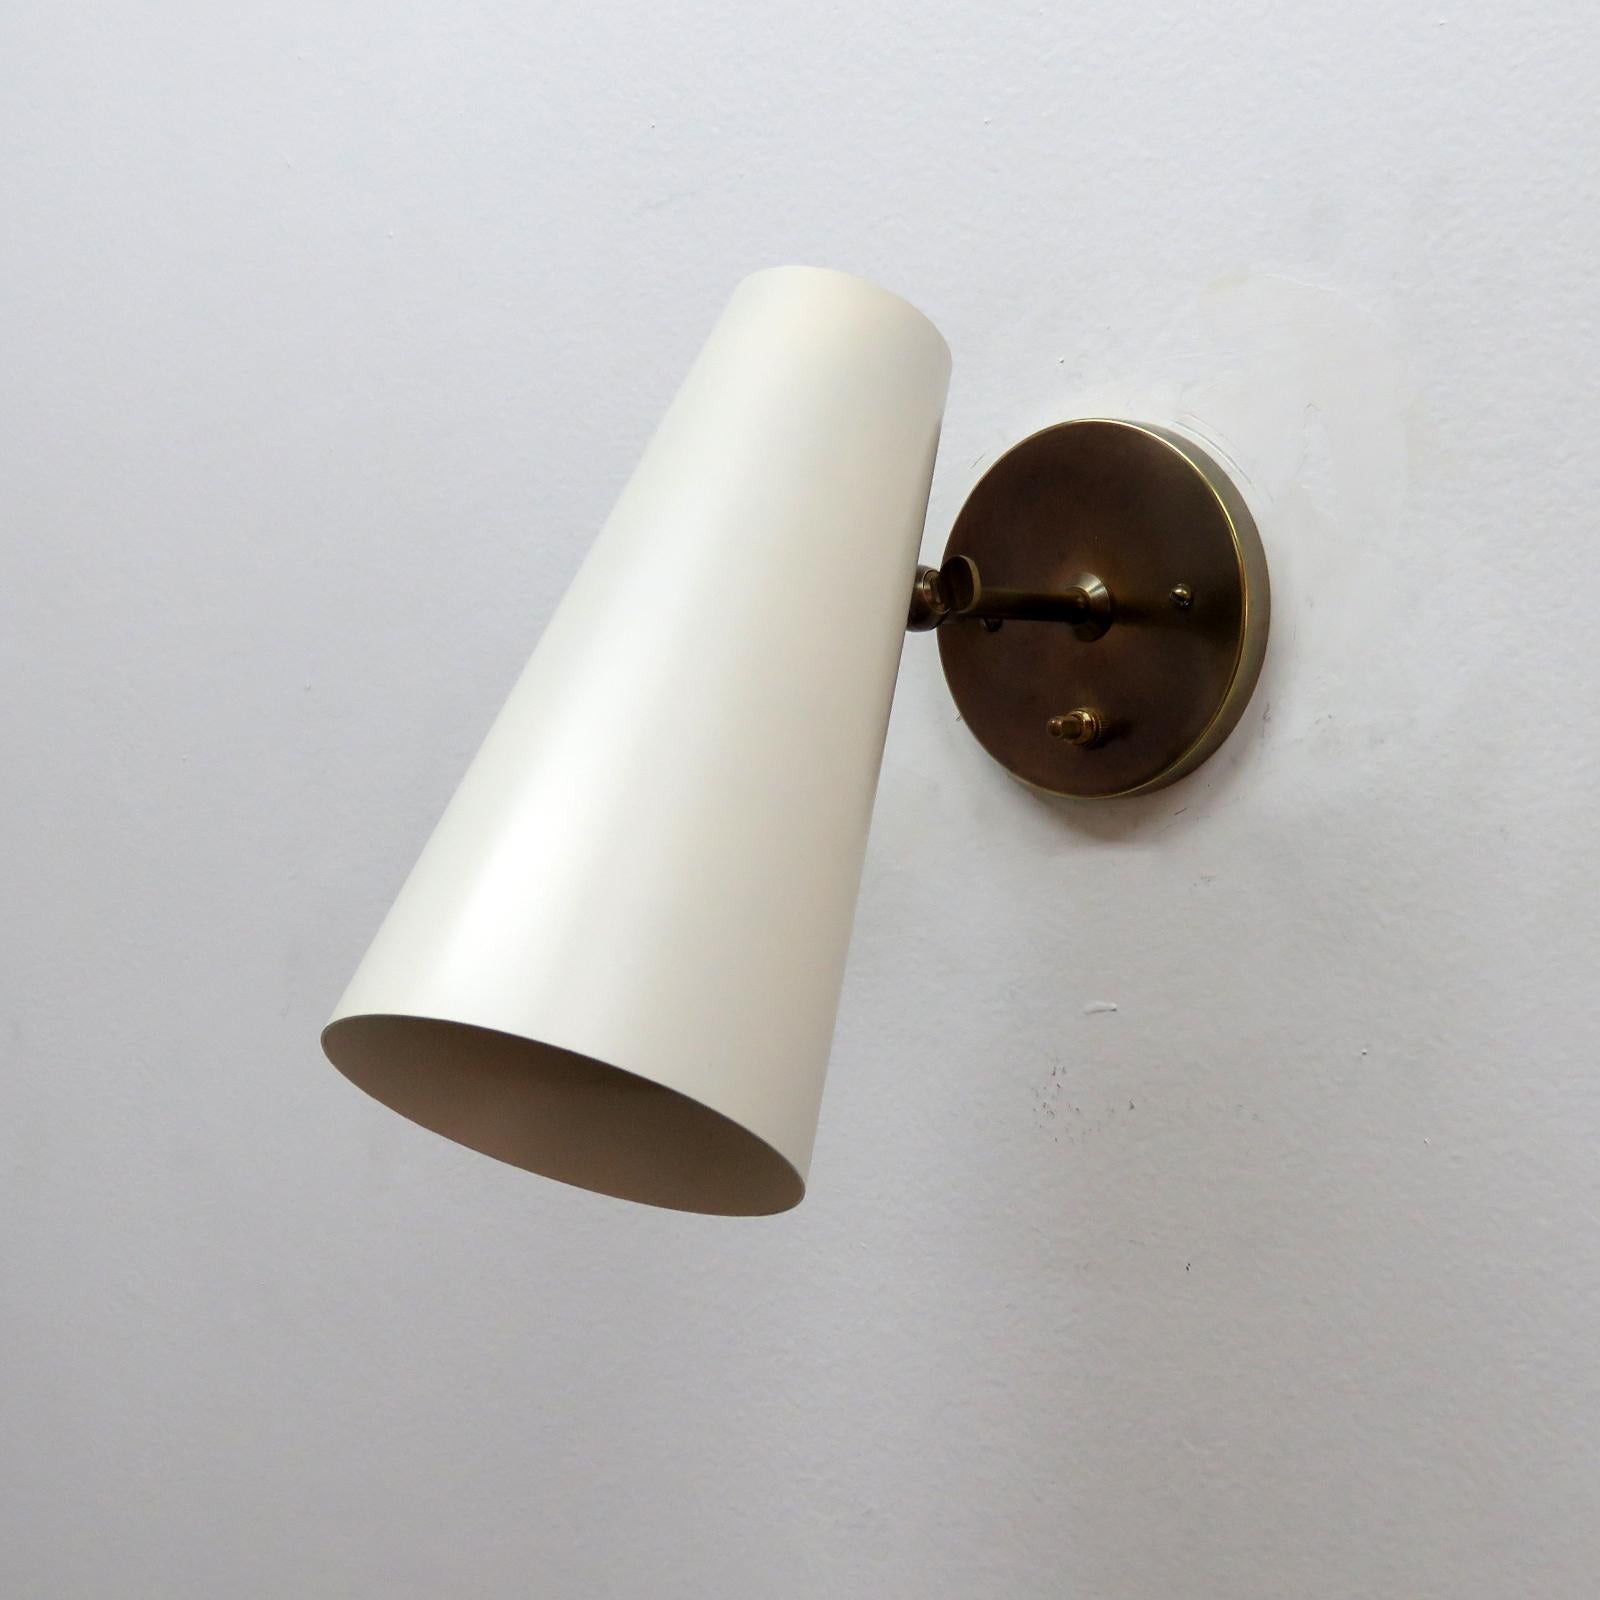 Elegant articulate 'Copa' wall lights designed by Gallery L7, handcrafted and finished in Los Angeles from American brass with an eggshell colored cone on aged brass hardware, the angle of the cone can be adjusted, individual on/off switch on each